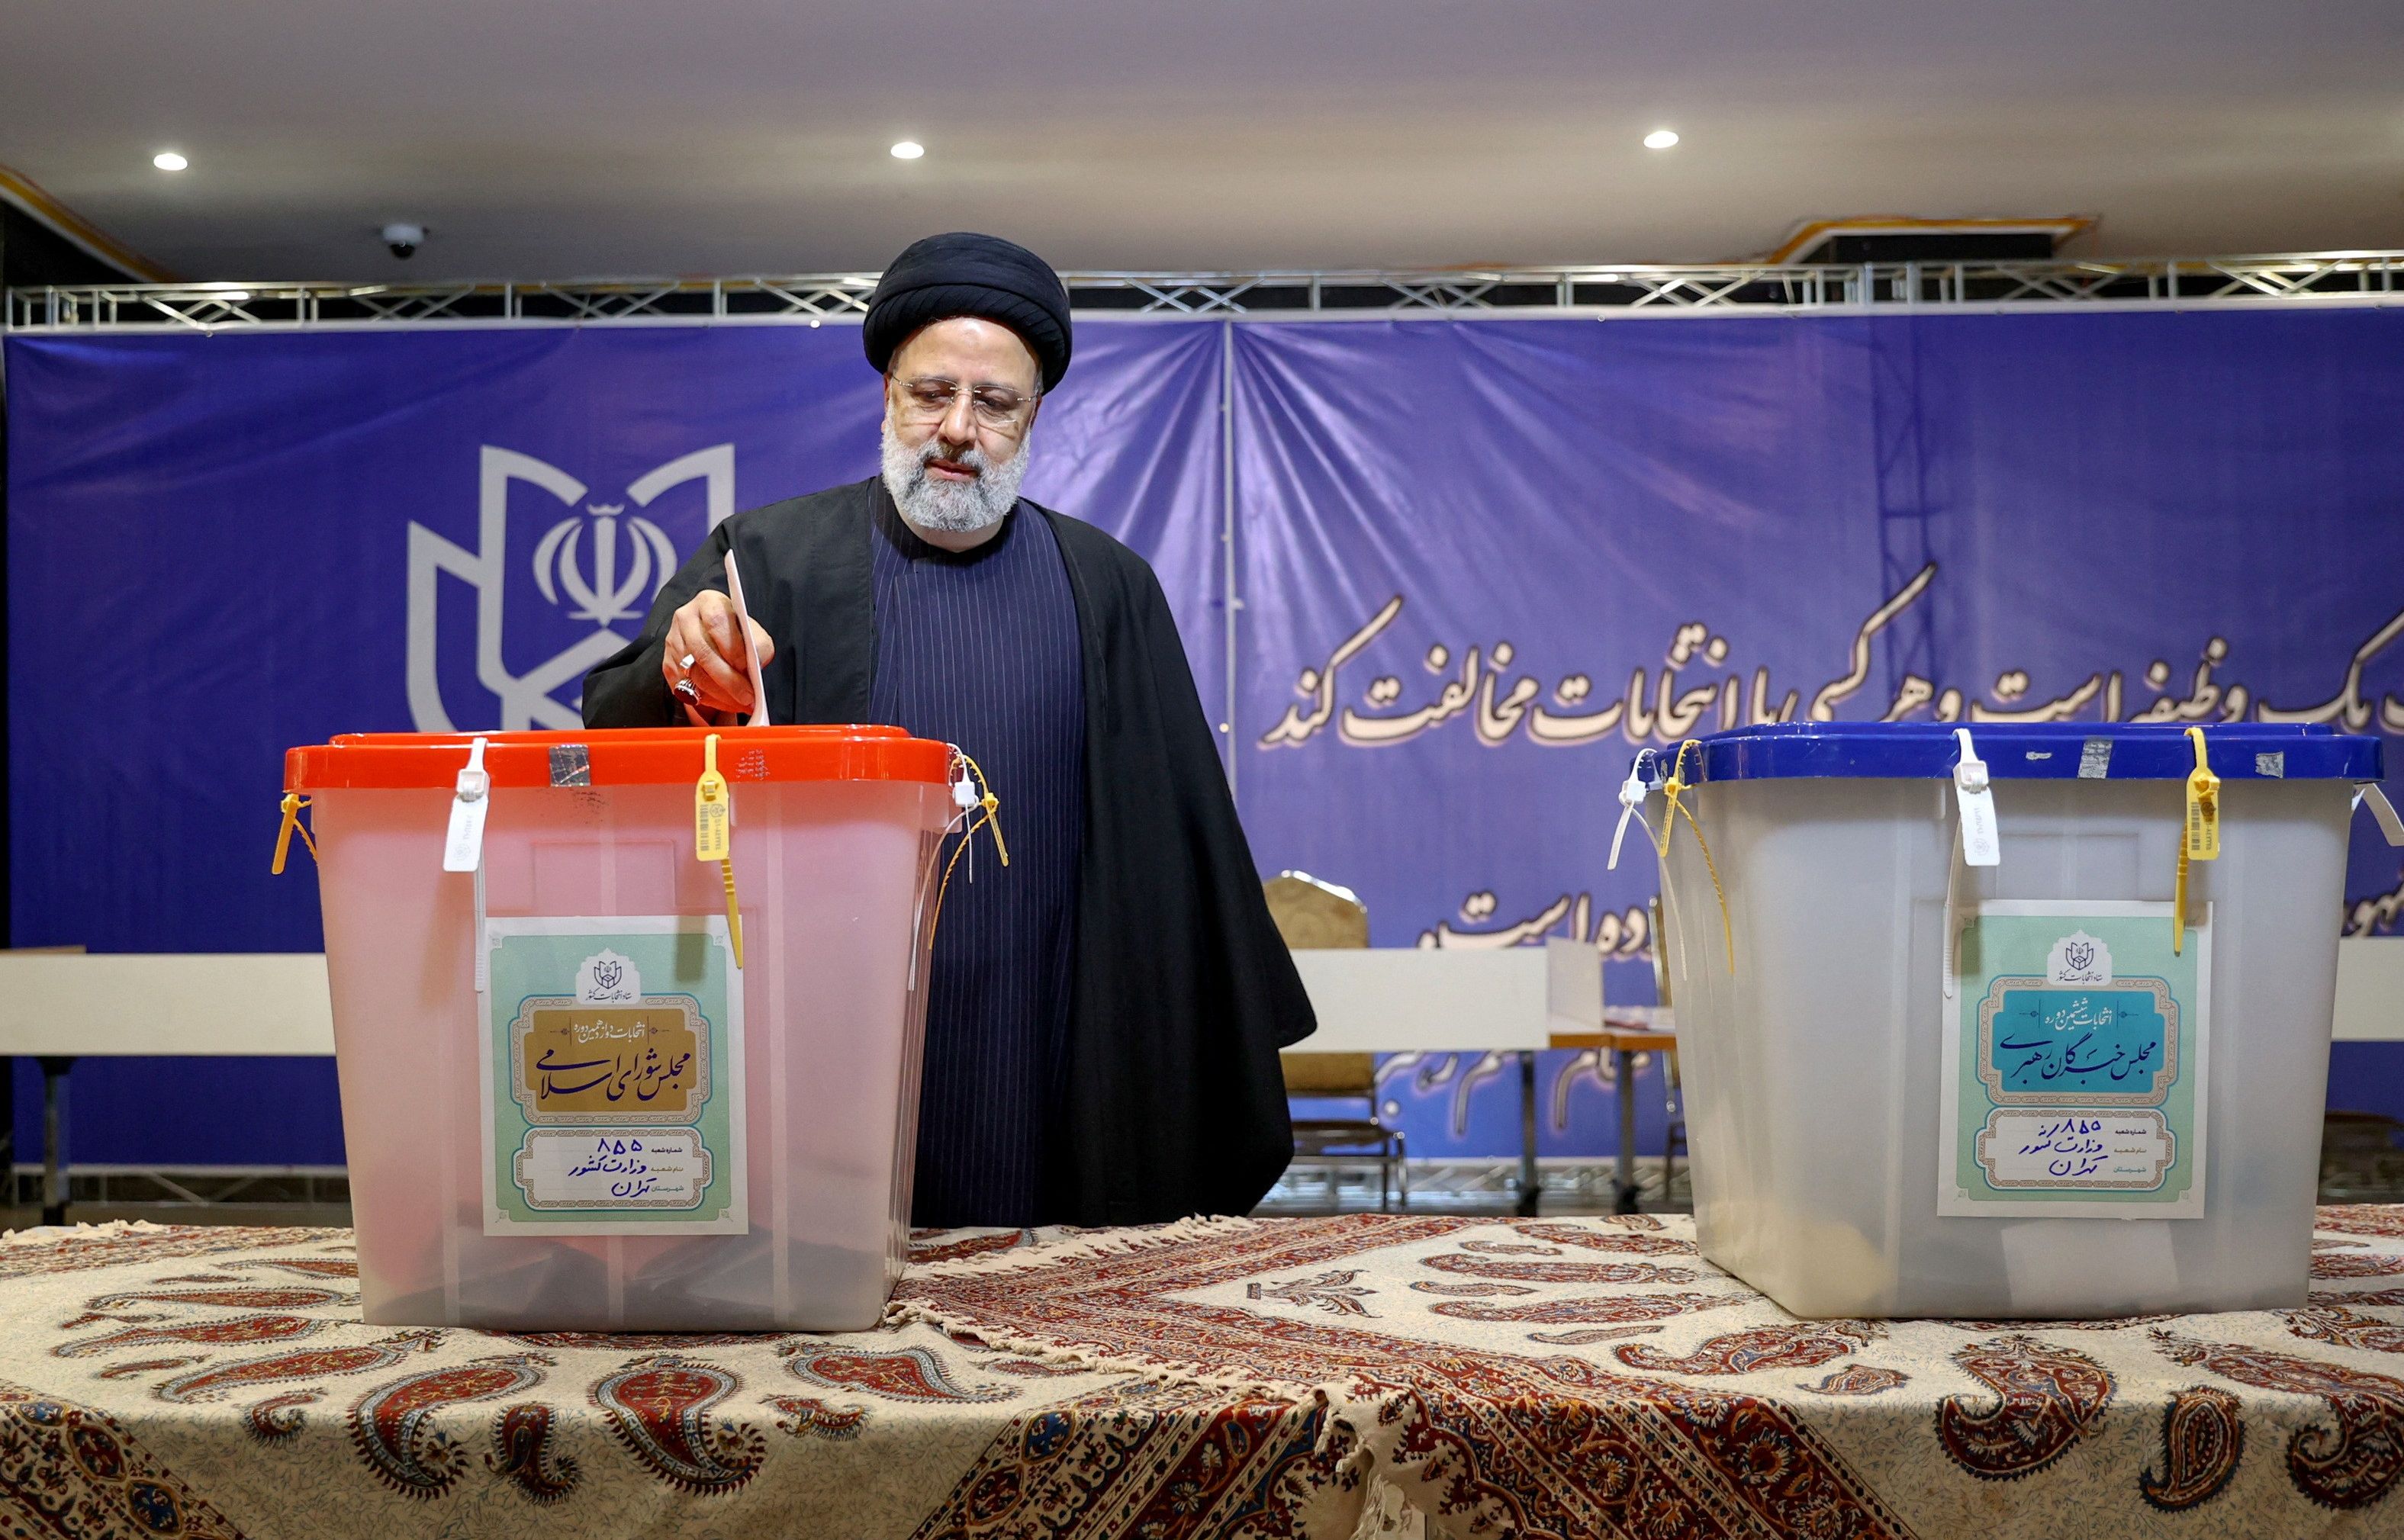 Iran elections: Hardliners have grip, but foreign policy leans pragmatic